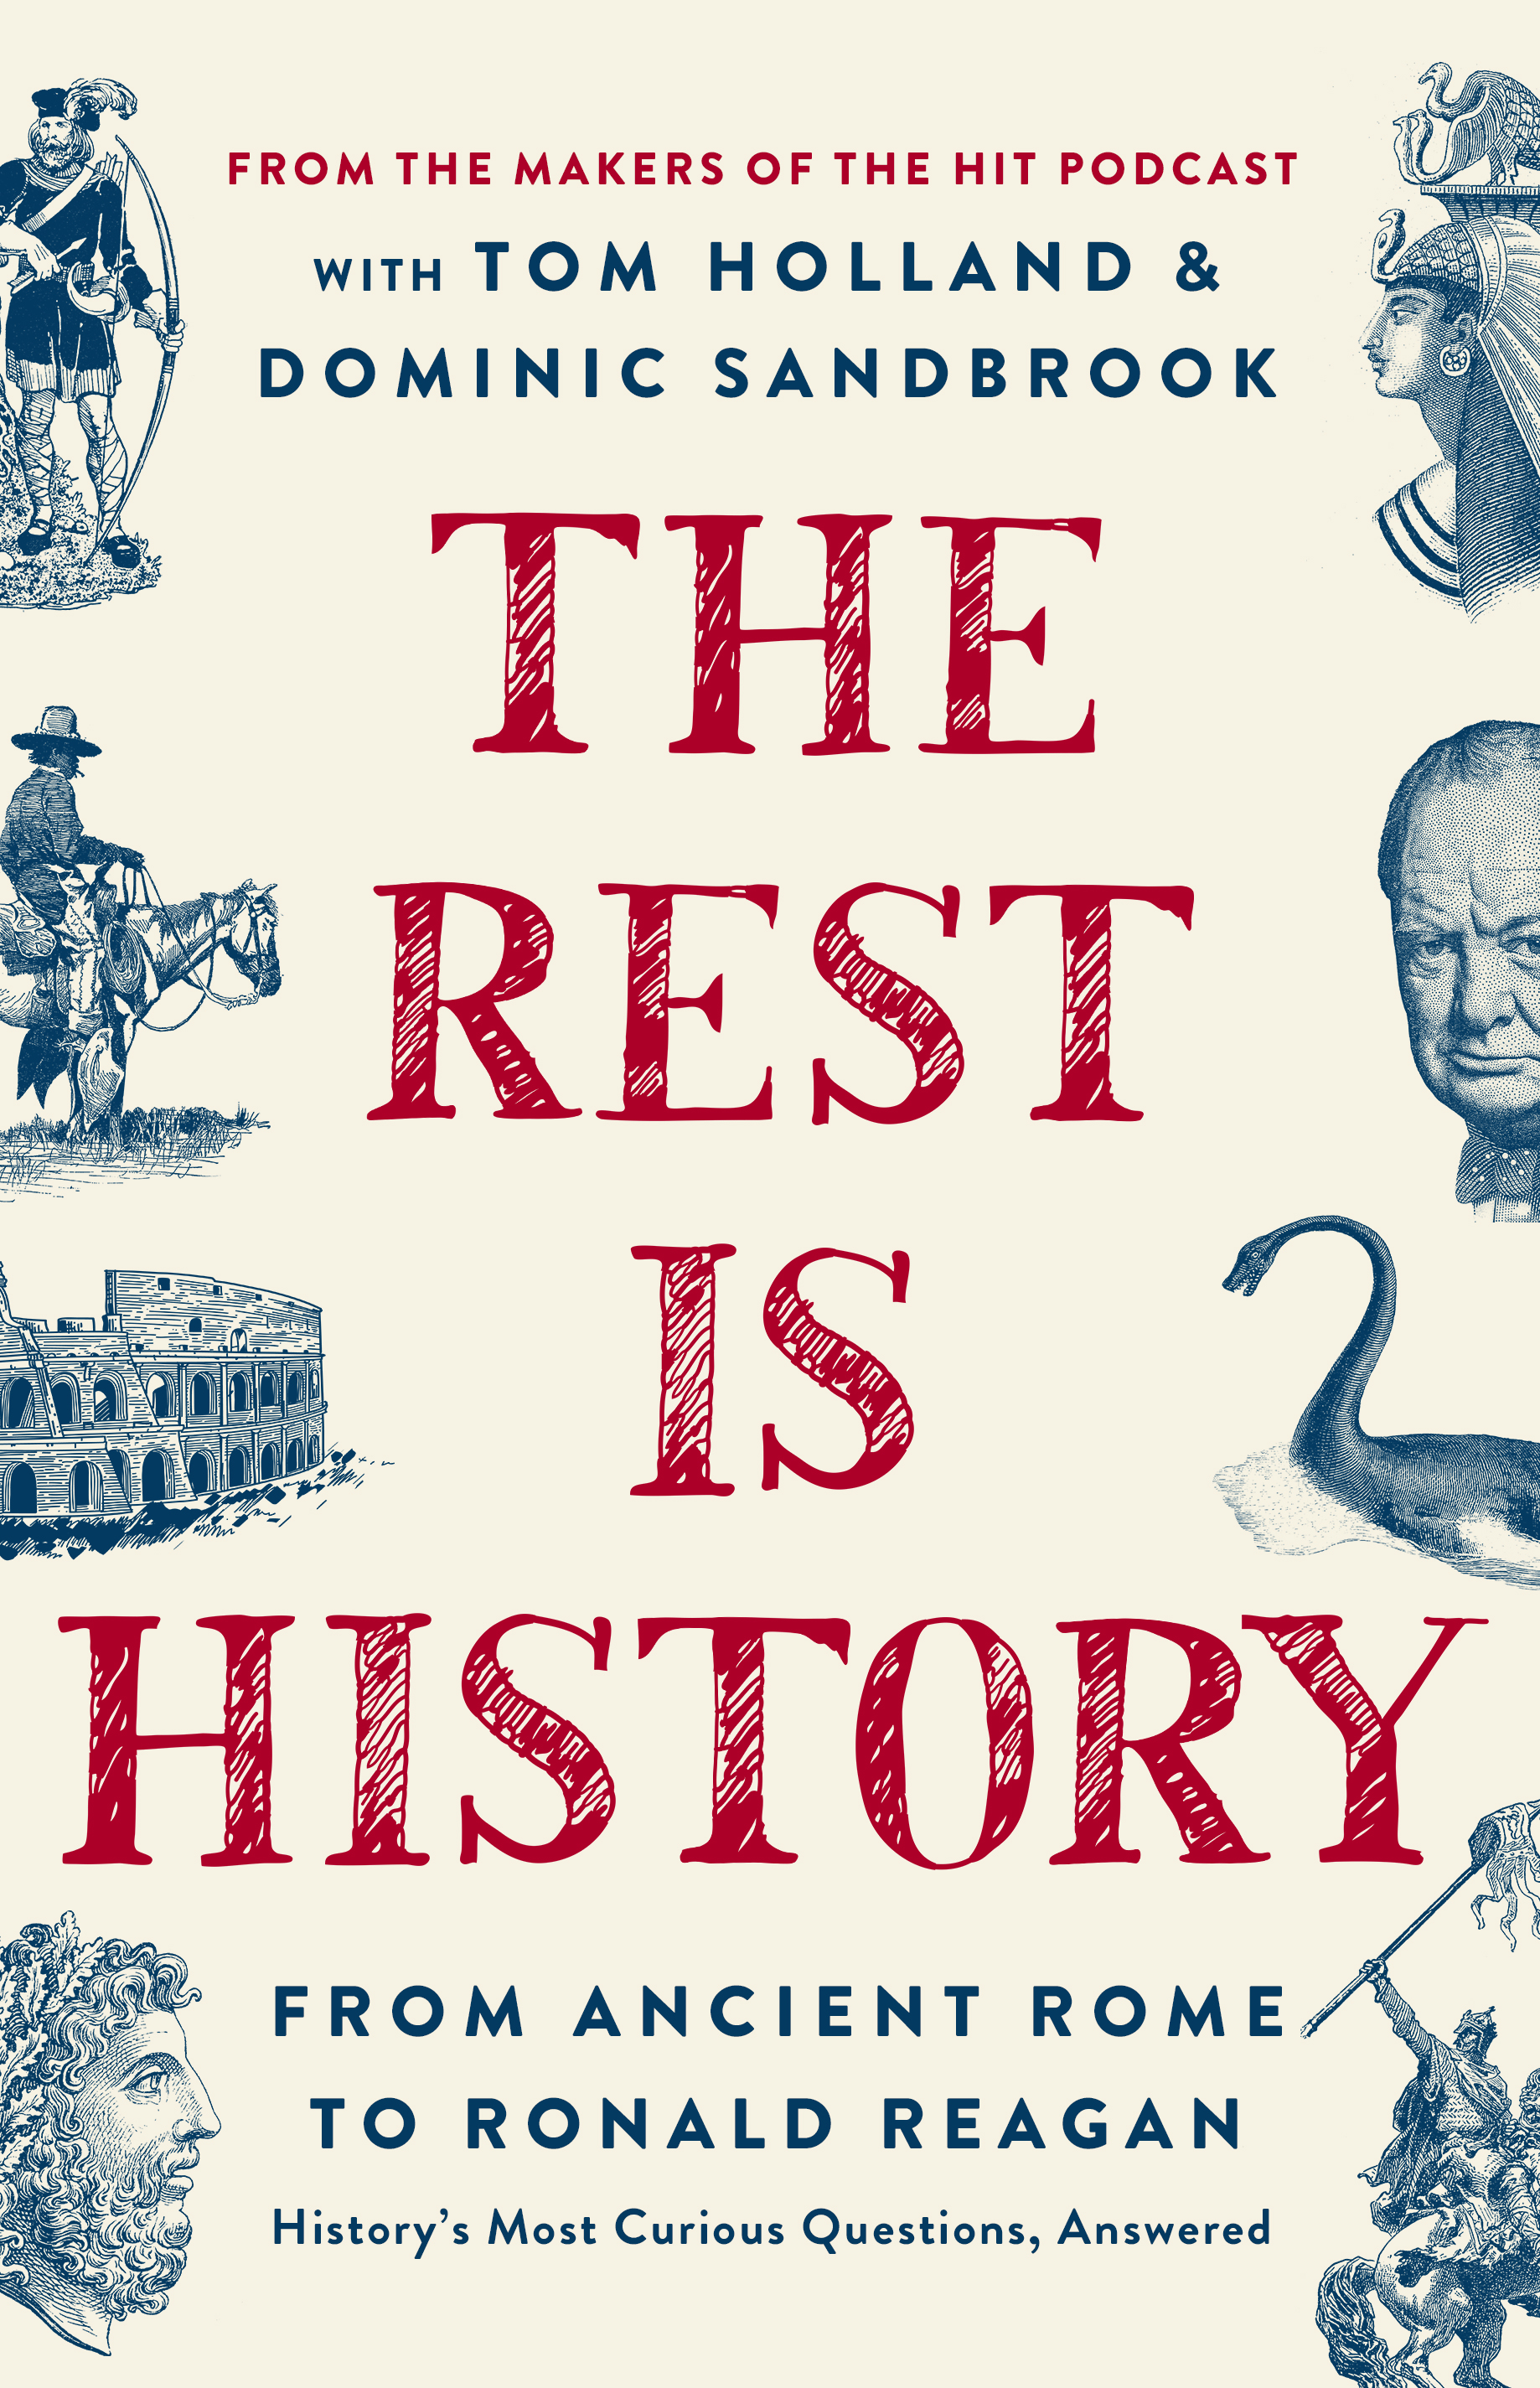 The cover of the book The Rest is History, adapted from the Rest Is History podcast